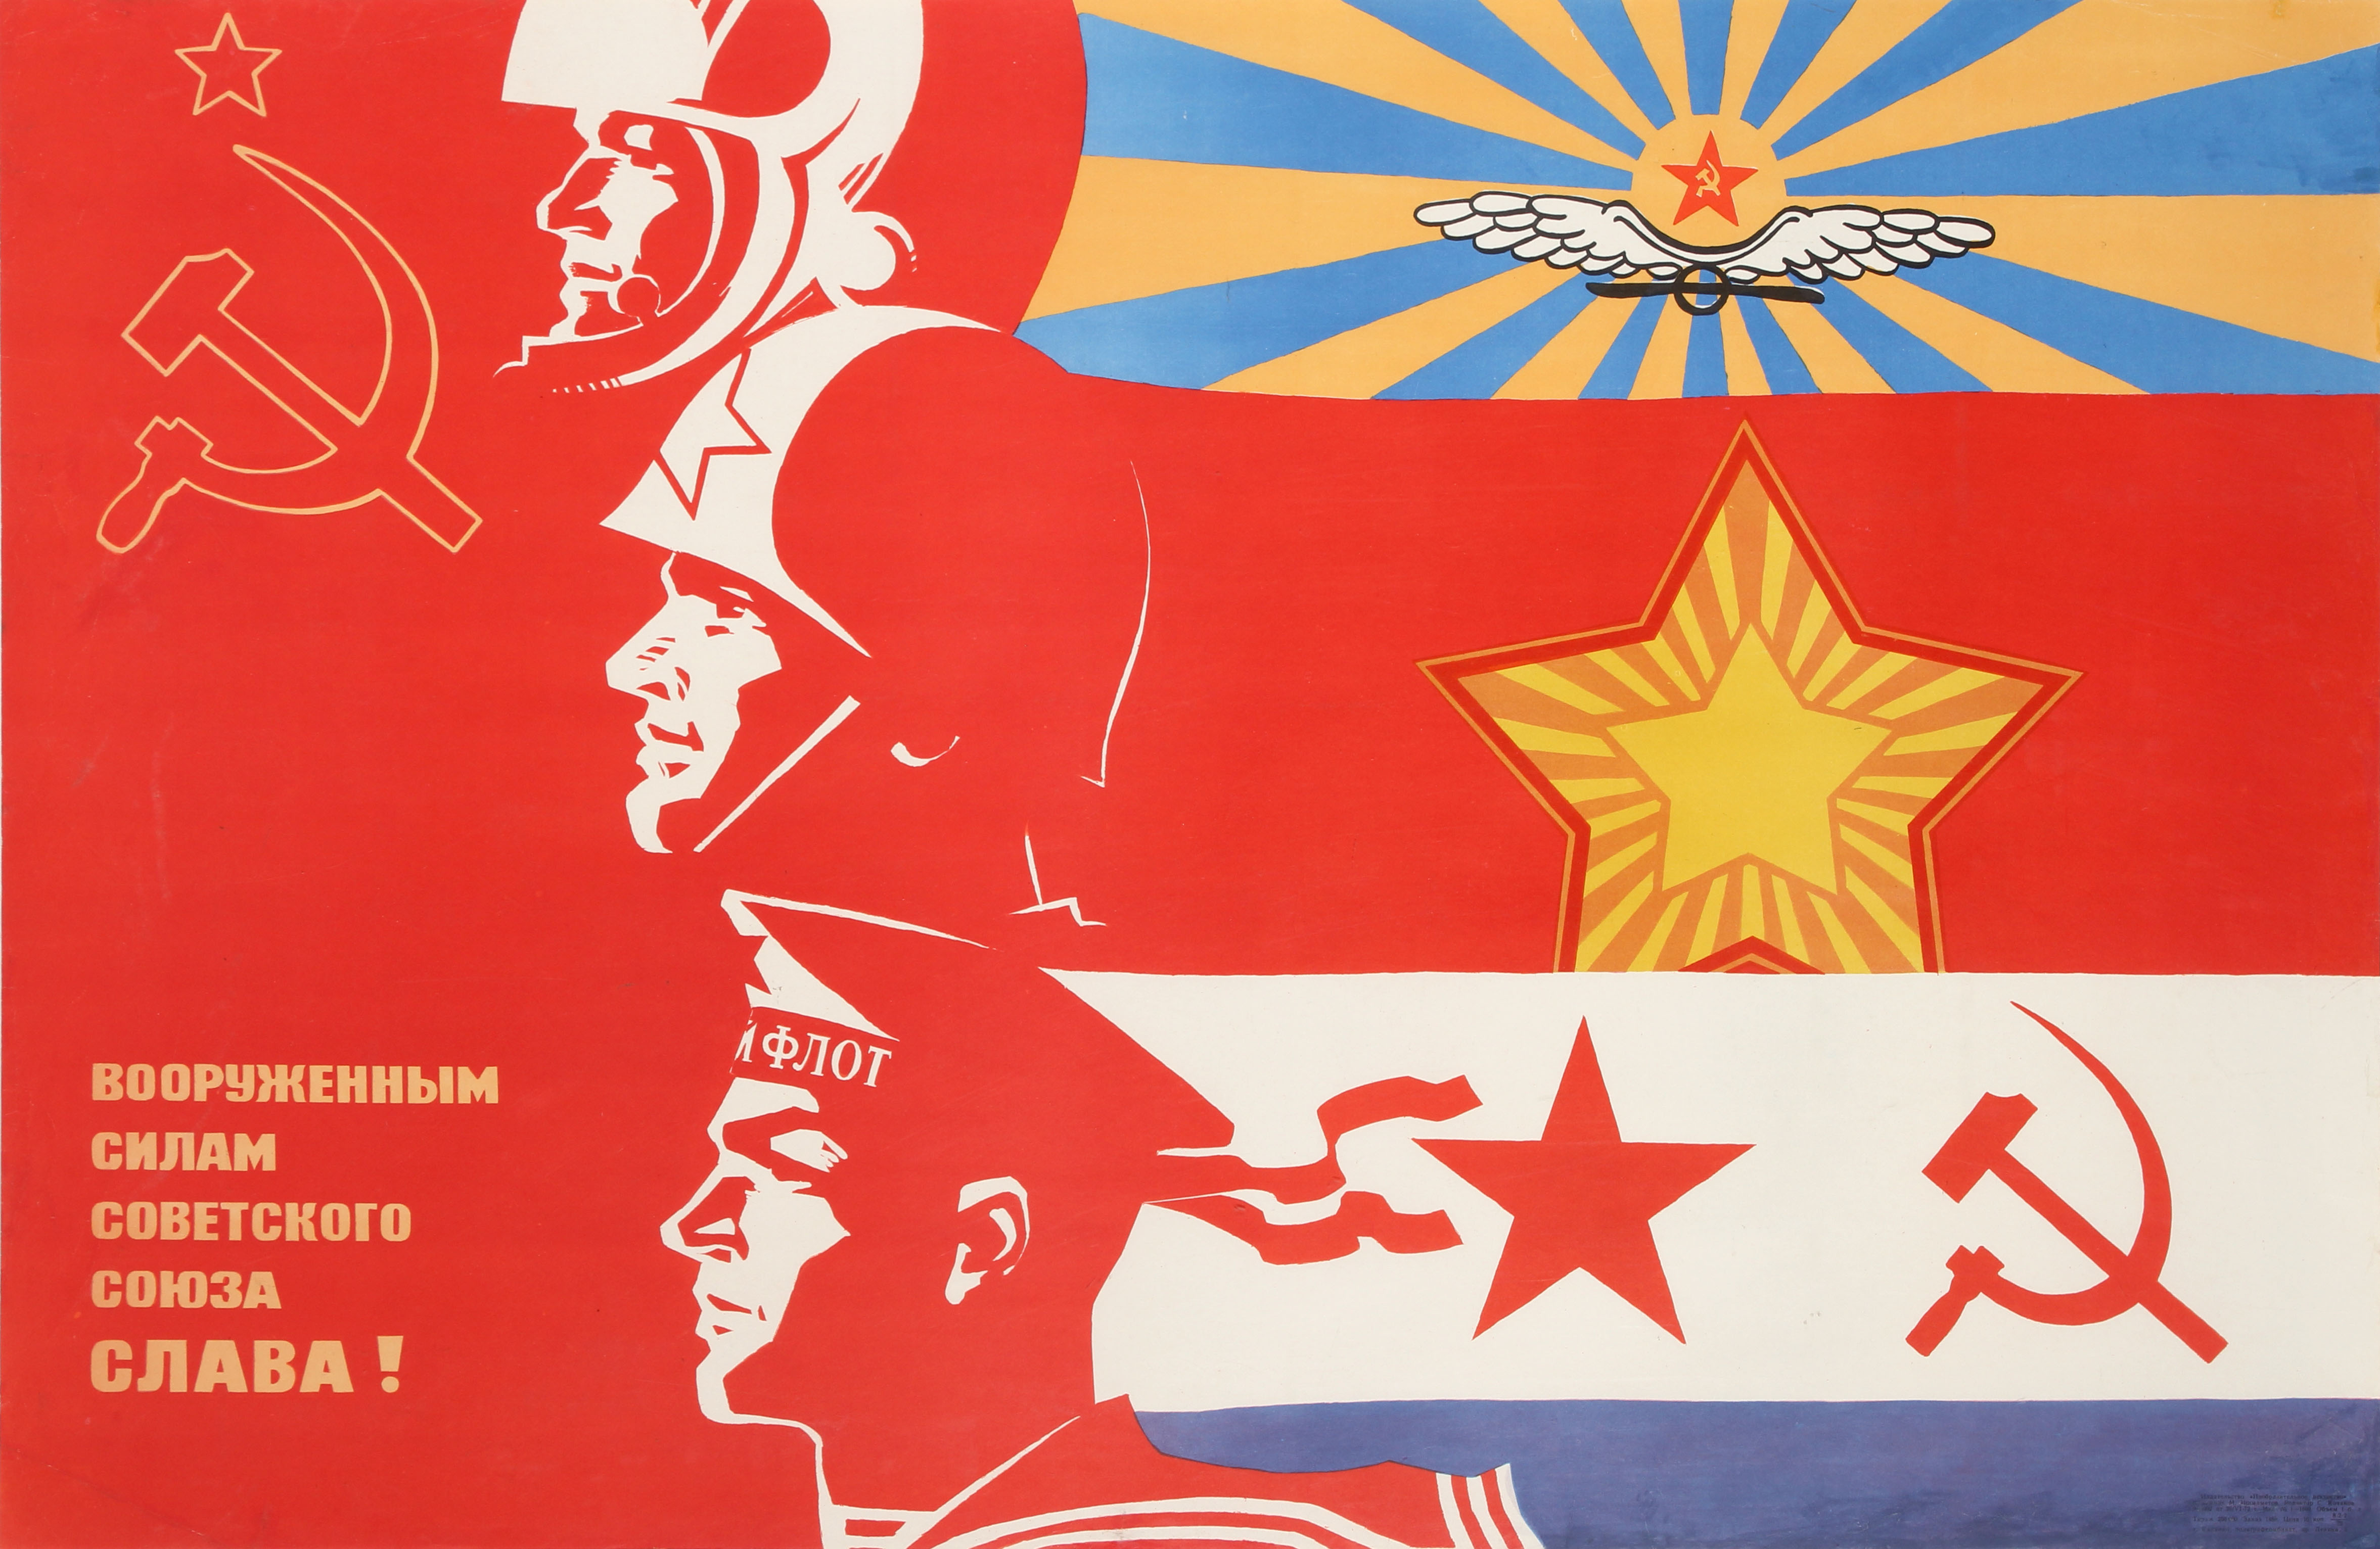 Propaganda Poster Glory to Armed Forces USSR Cold War